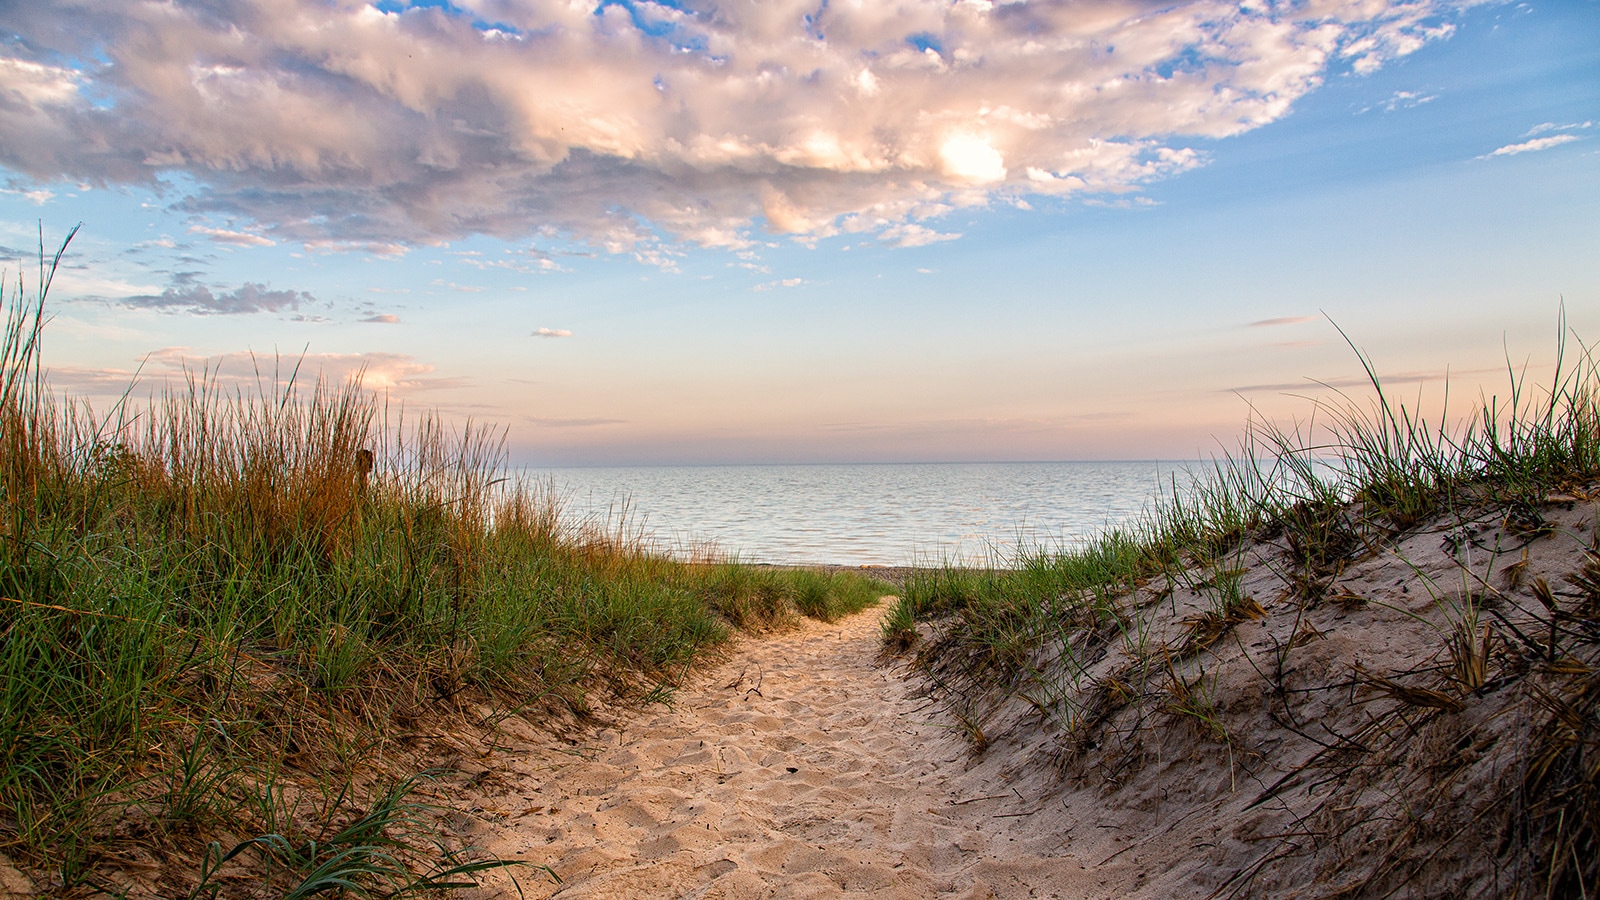 Road Trip to Indiana Dunes National Park